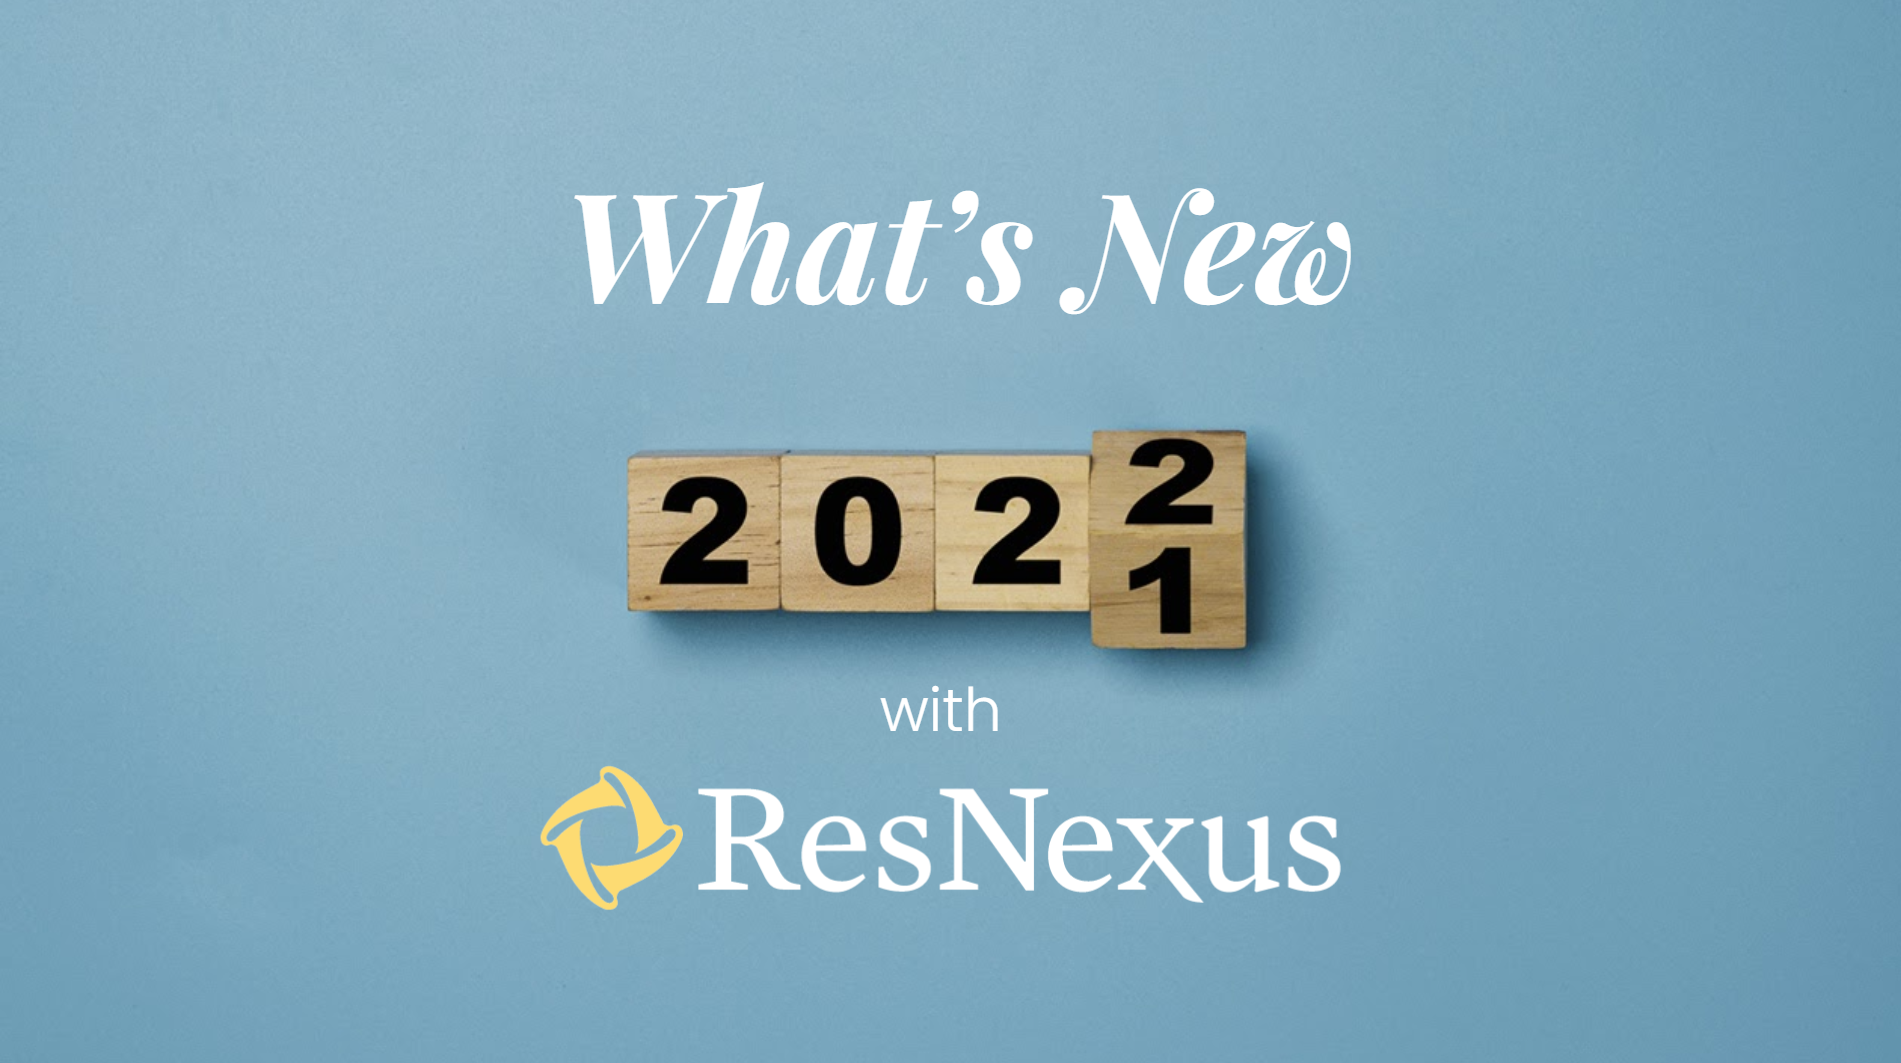 What's New with ResNexus